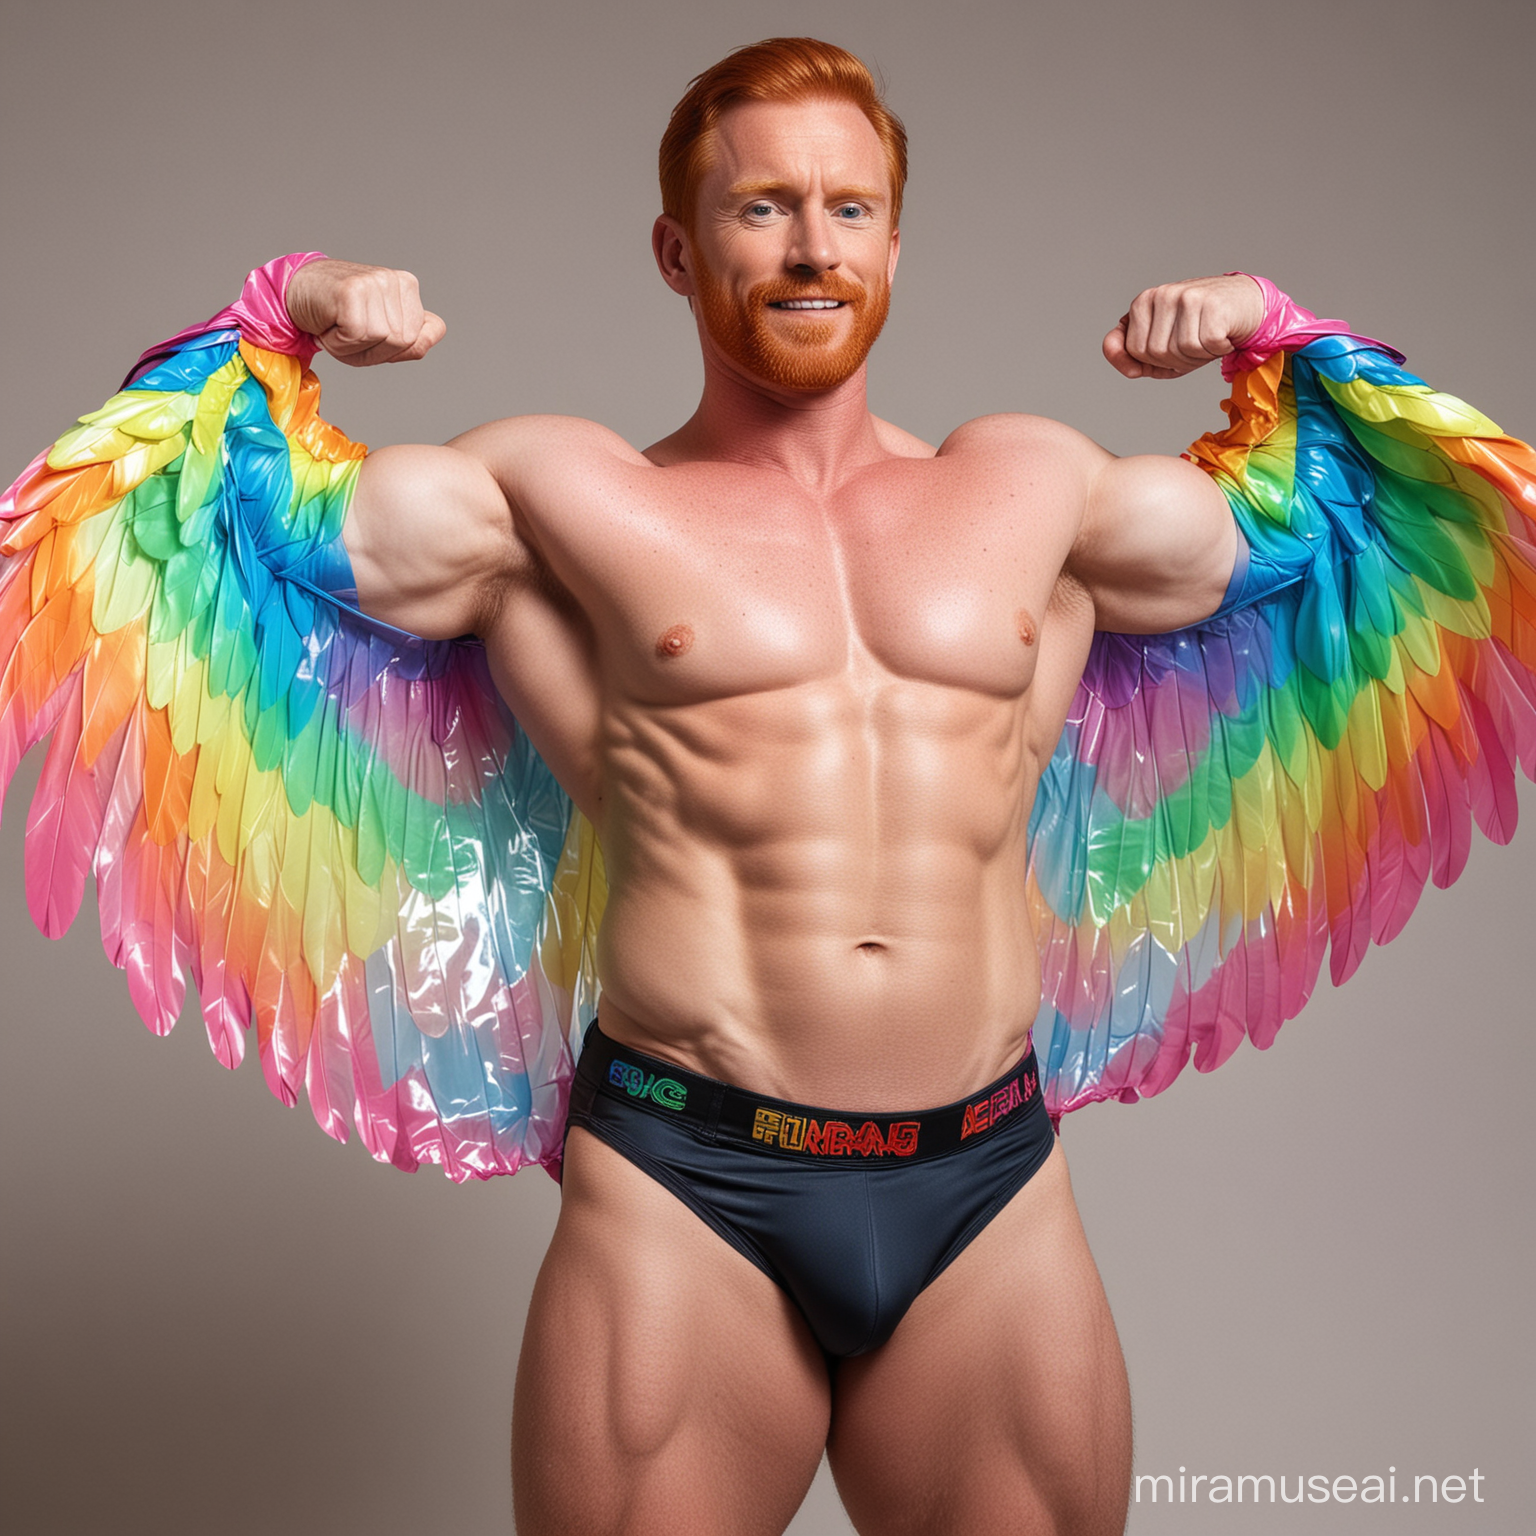 Powerful Redhead Bodybuilder Flexing with Rainbow Eagle Wings Jacket and Doraemon